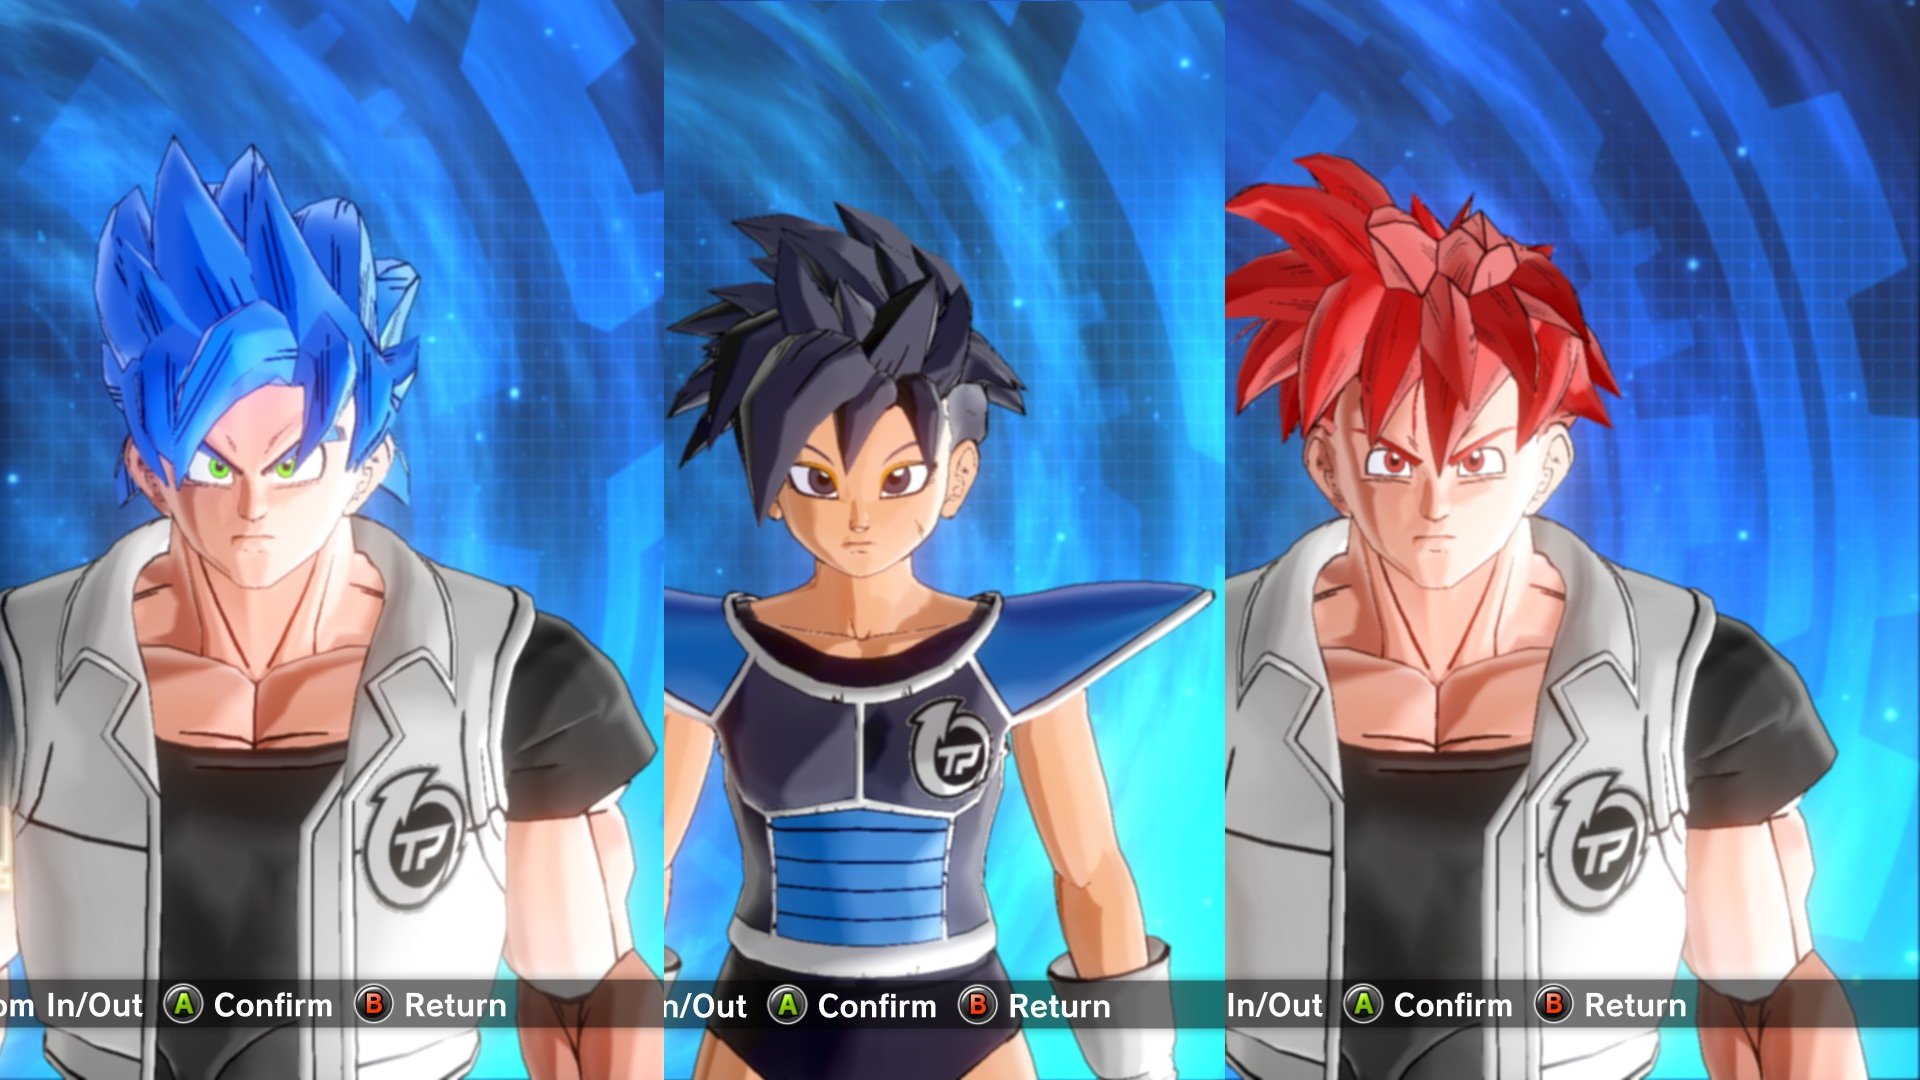 Sonic Frontiers Themes + Some Extras – Xenoverse Mods